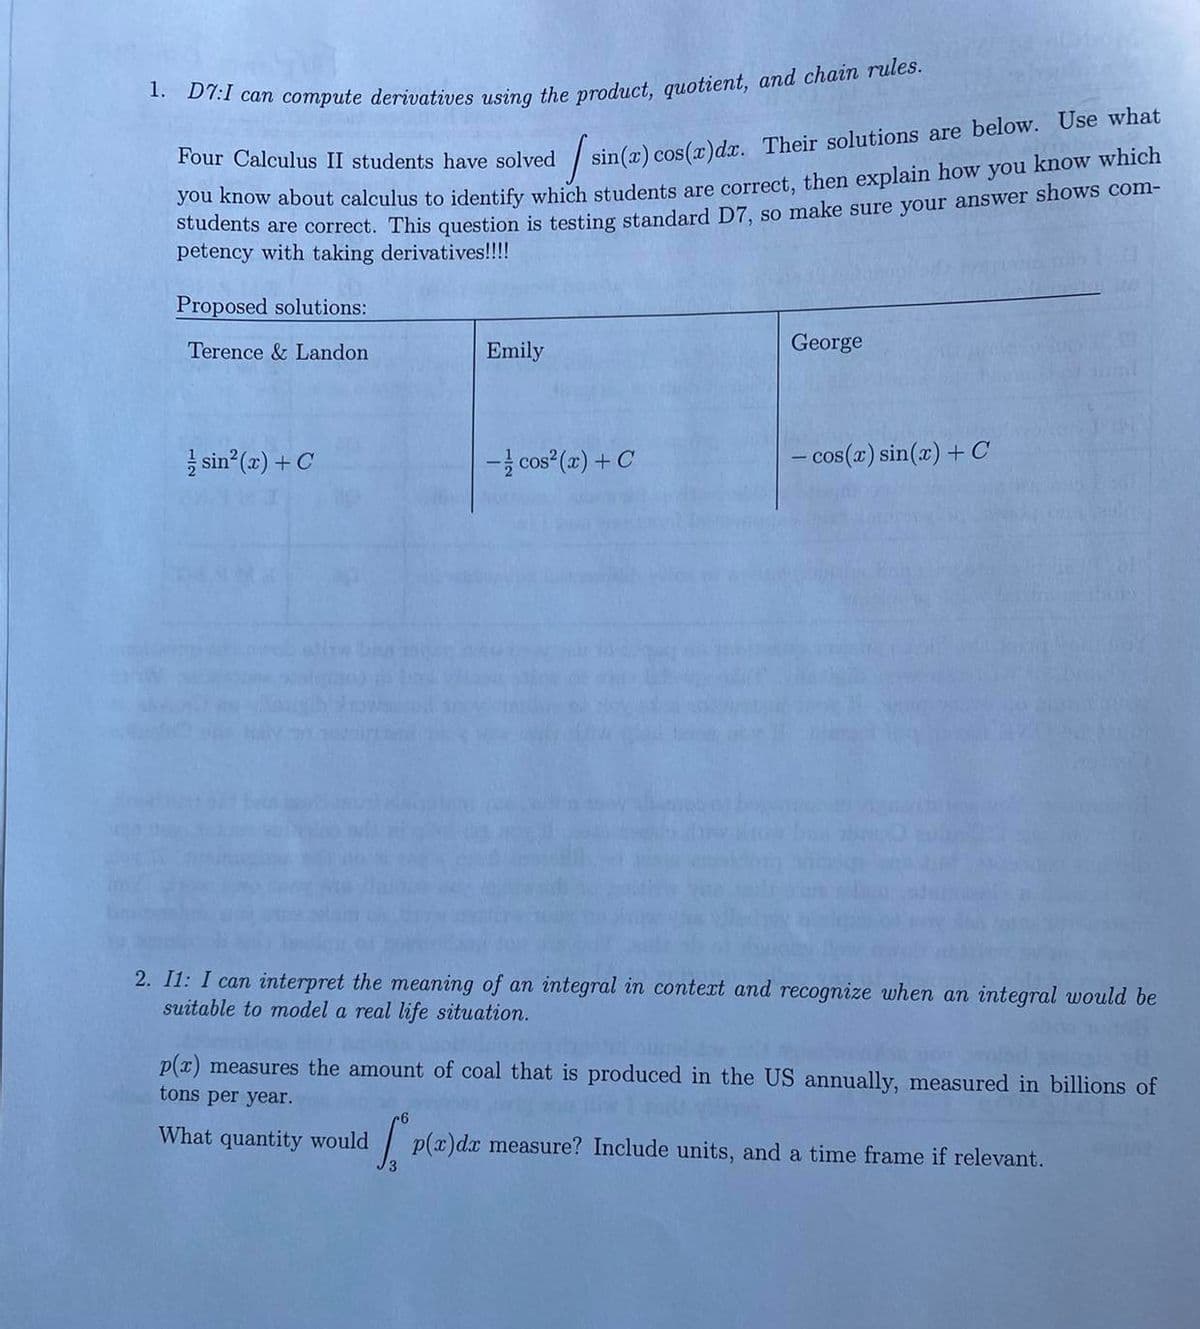 1. D7:I can compute derivatives using the product, quotient, and chain rules.
Four Calculus II students have solved /s
sin(x) cos(x) dx. Their solutions are below. Use what
you know about calculus to identify which students are correct, then explain how you know which
students are correct. This question is testing standard D7, so make sure your answer shows com-
petency with taking derivatives!!!!
Proposed solutions:
Terence & Landon
sin²(x) + C
Emily
- cos²(x) + C
George
- cos(x) sin(x) + C
2. I1: I can interpret the meaning of an integral in context and recognize when an integral would be
suitable to model a real life situation.
p(x) measures the amount of coal that is produced in the US annually, measured in billions of
tons per year.
What quantity would
6
S.P
p(x) dx measure? Include units, and a time frame if relevant.